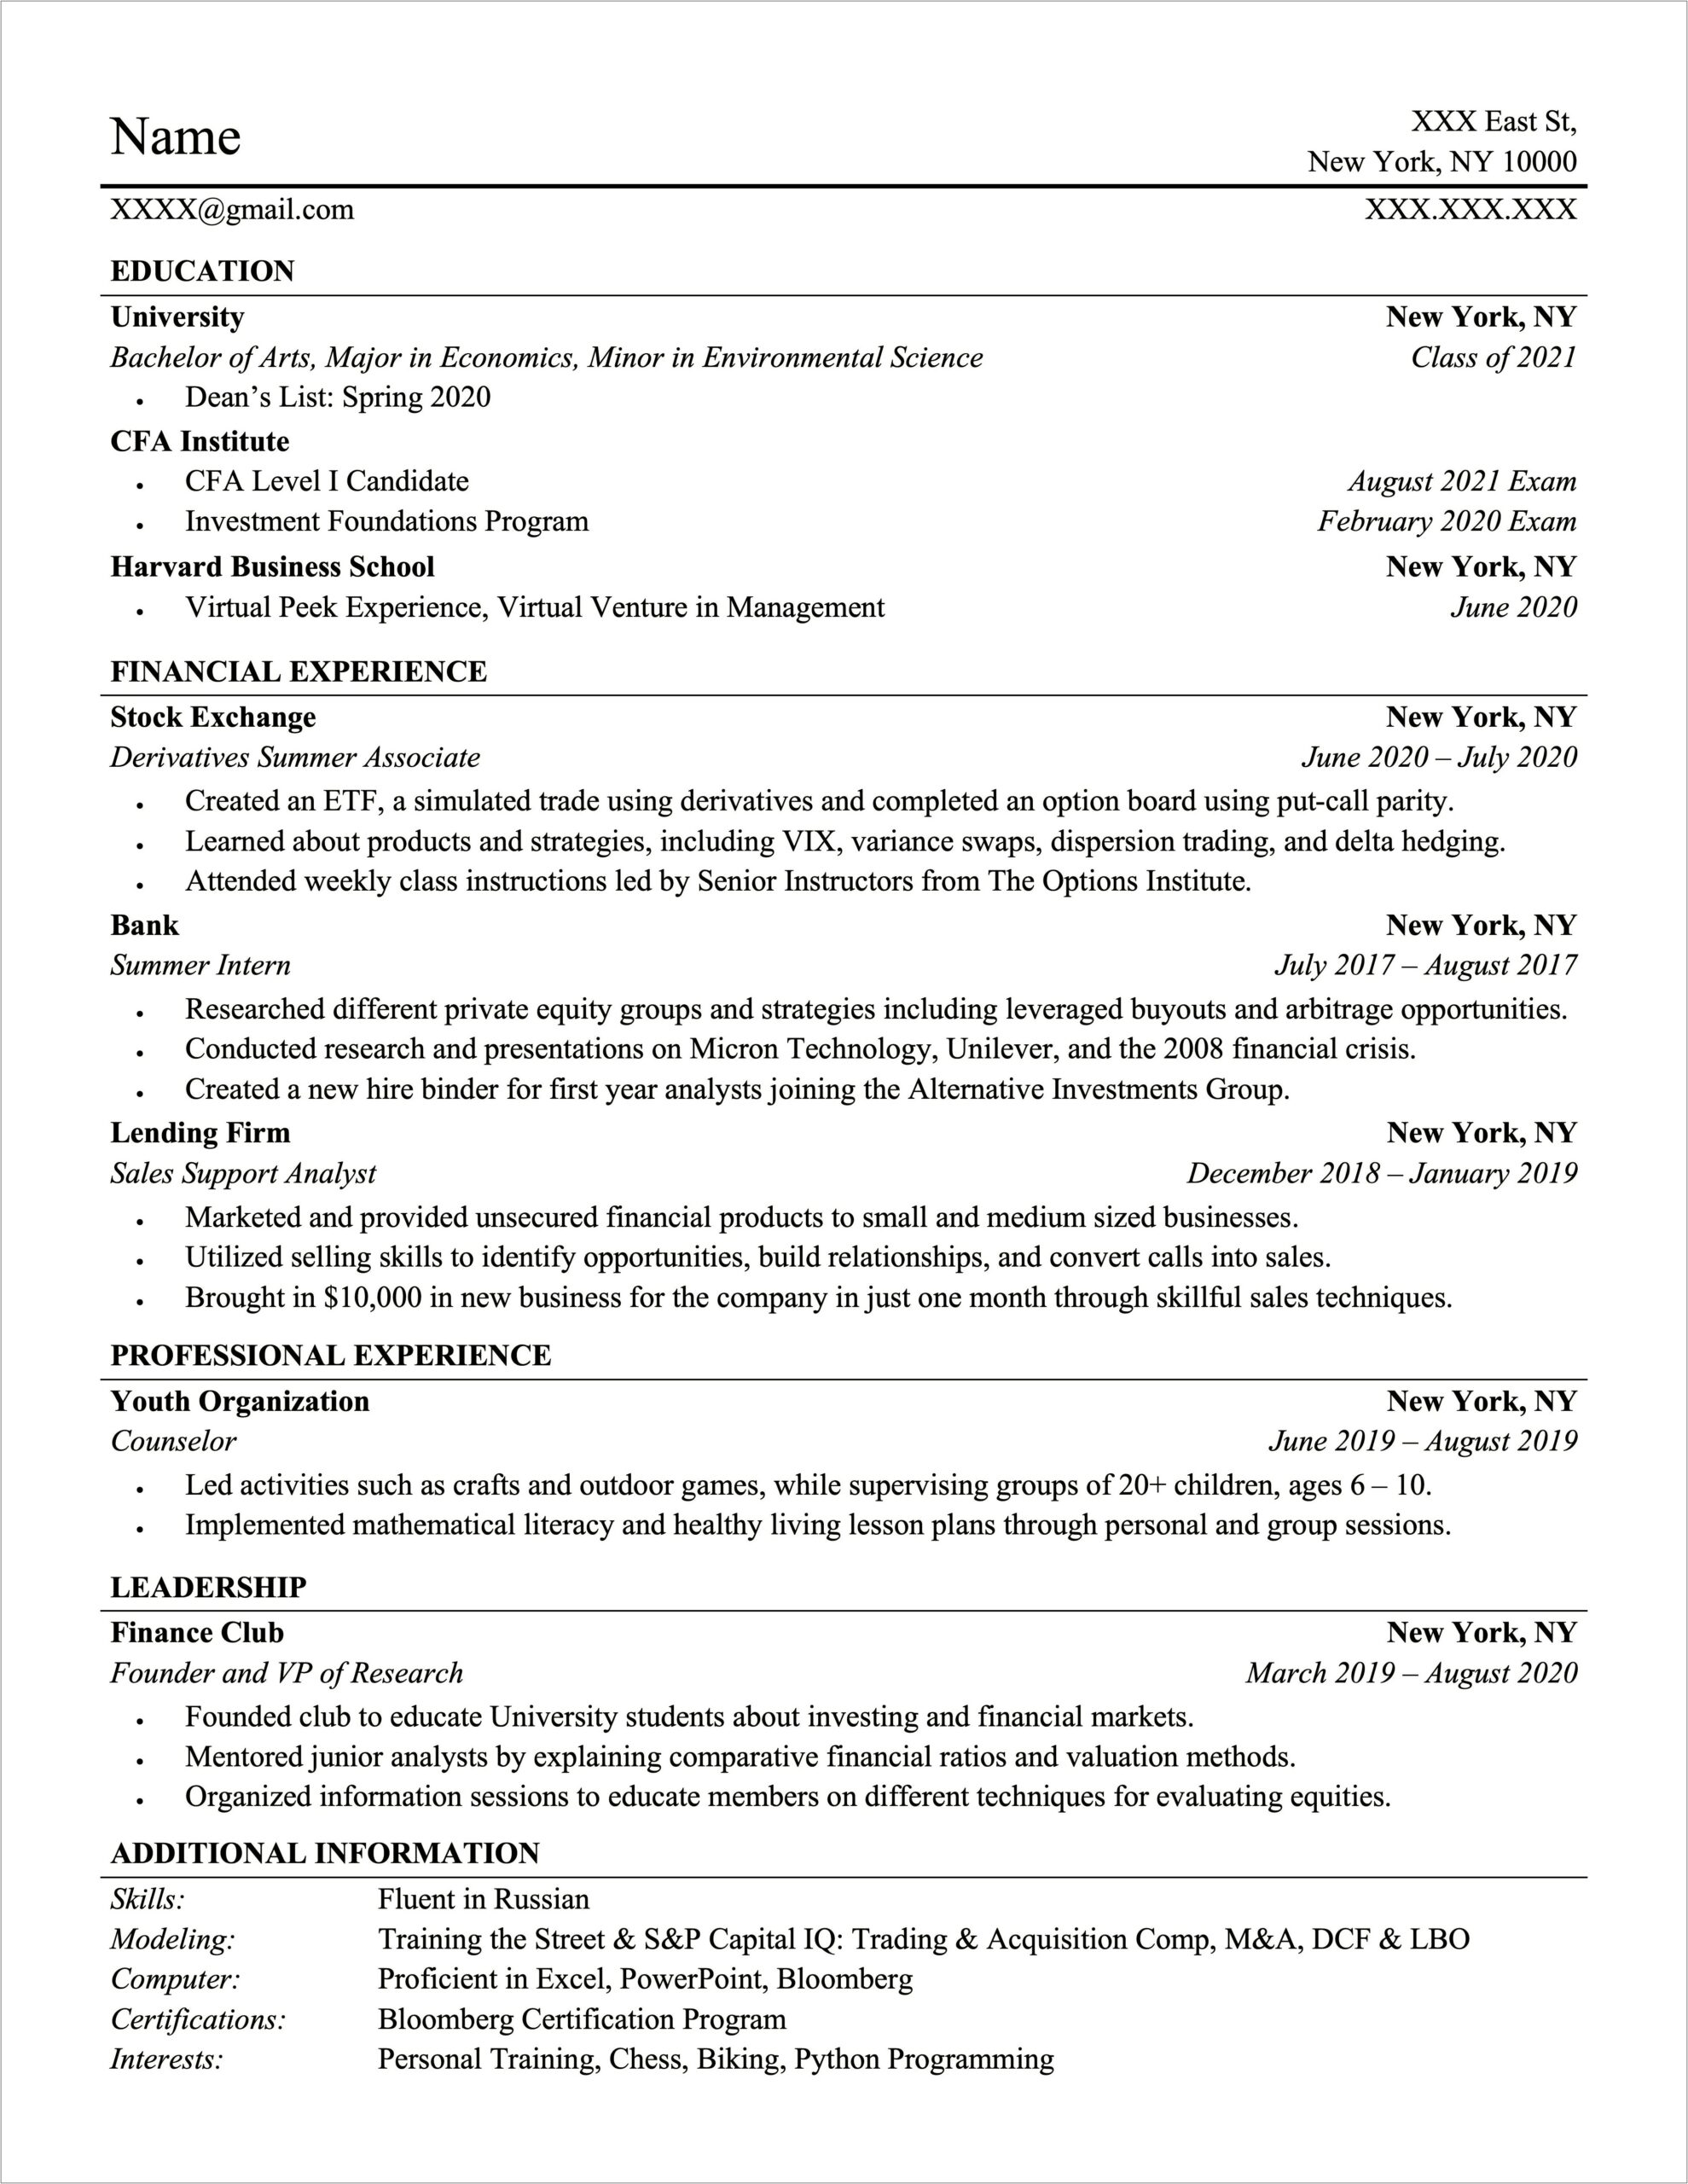 Skills Section Of Resume Wso